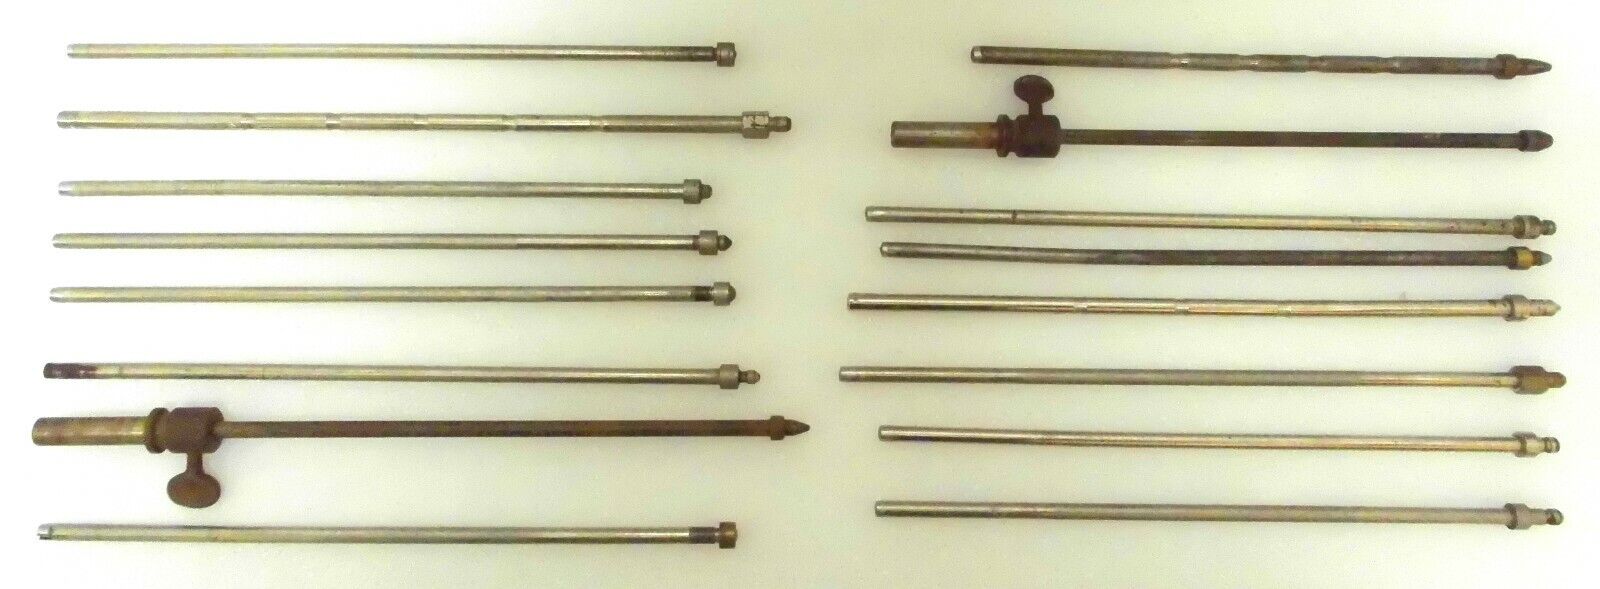 16 Misc. Used Cello End Pin Rods - Make an Offer!! Unbranded Does Not Apply